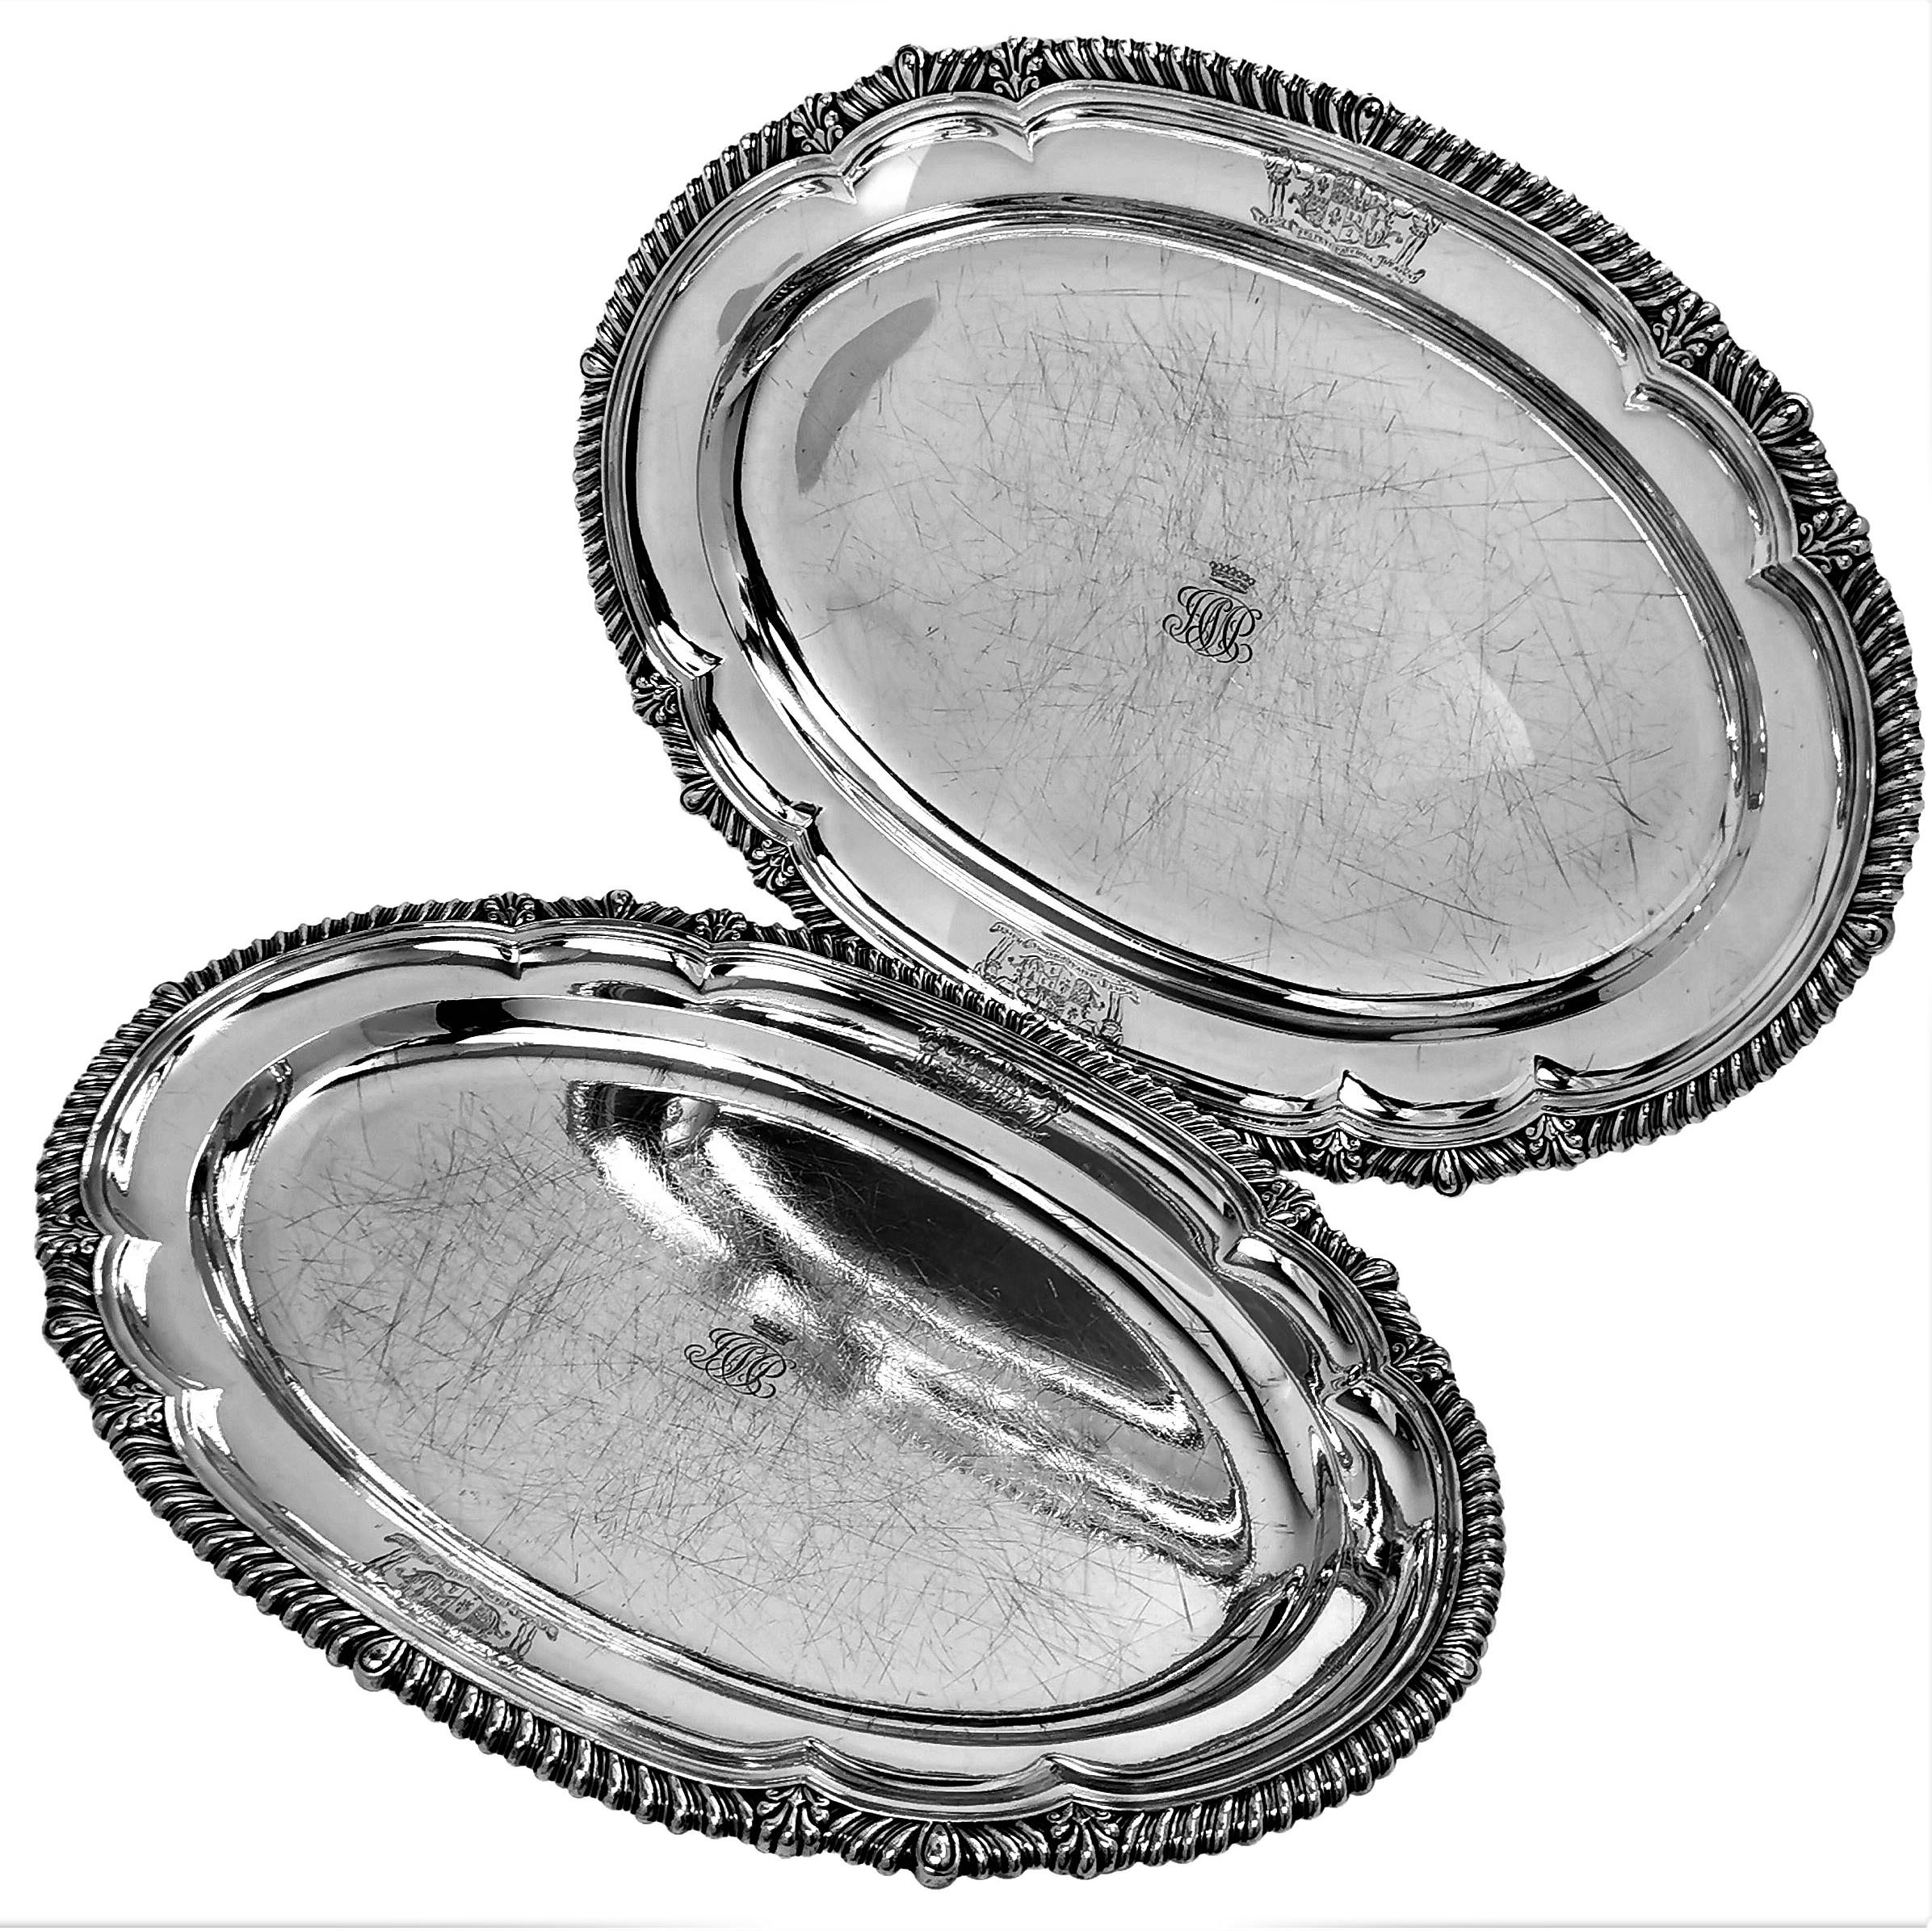 A pair of Antique sterling Silver Meat Platters with a shaped oval form, embellished with a classic gadroon edge. Each Silver Serving Platter has a a pair of Armorials engraved on the rim and a small monogram in the centre topped with the coronet of